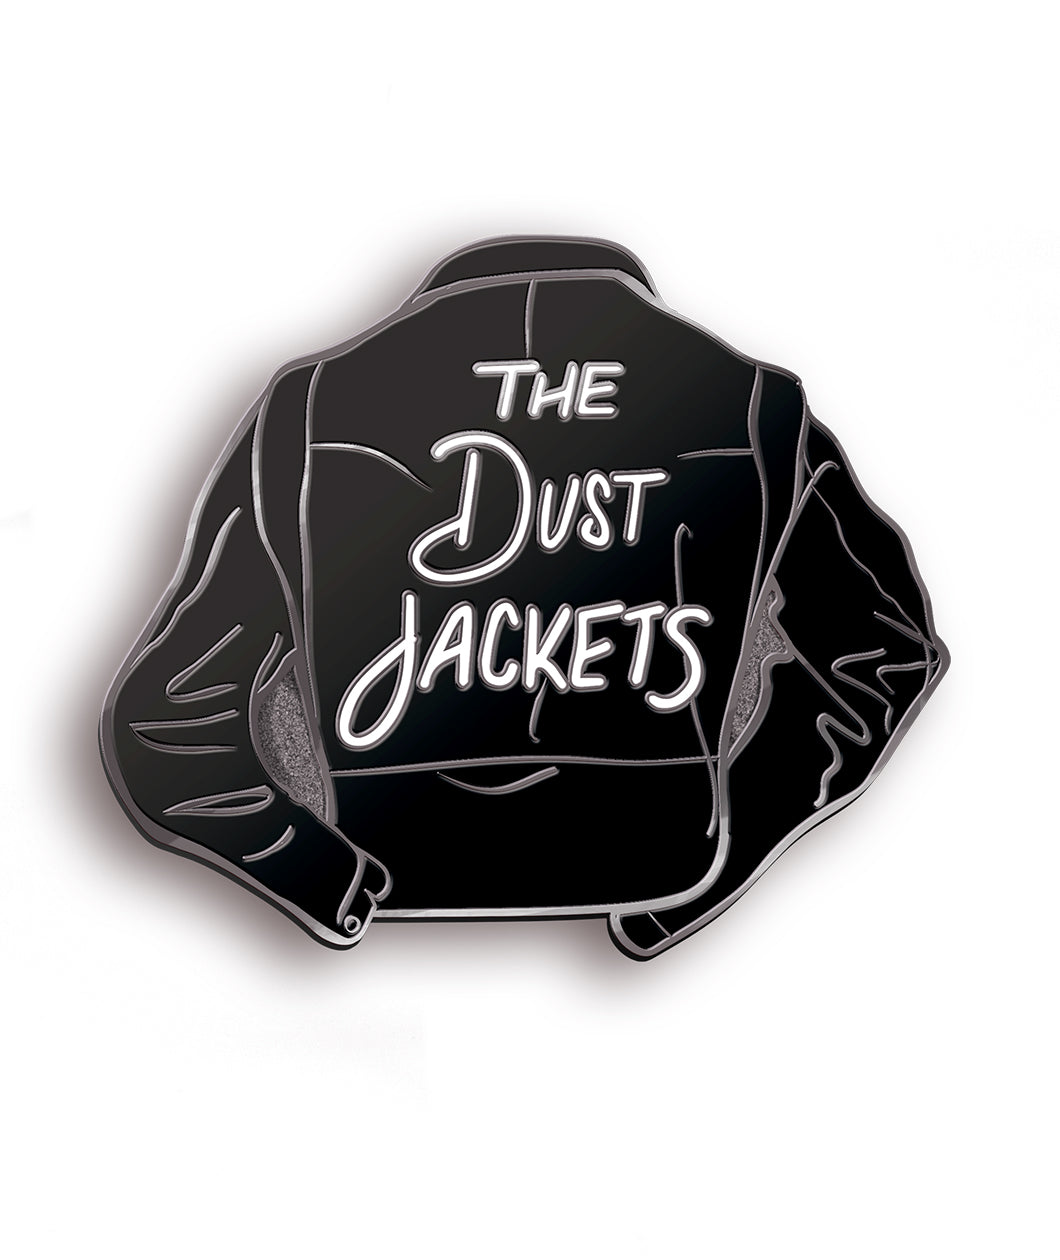 A black leather jacket with “The Dust Jackets” in a white sans serif font on the back of the jacket - from Books Unbound